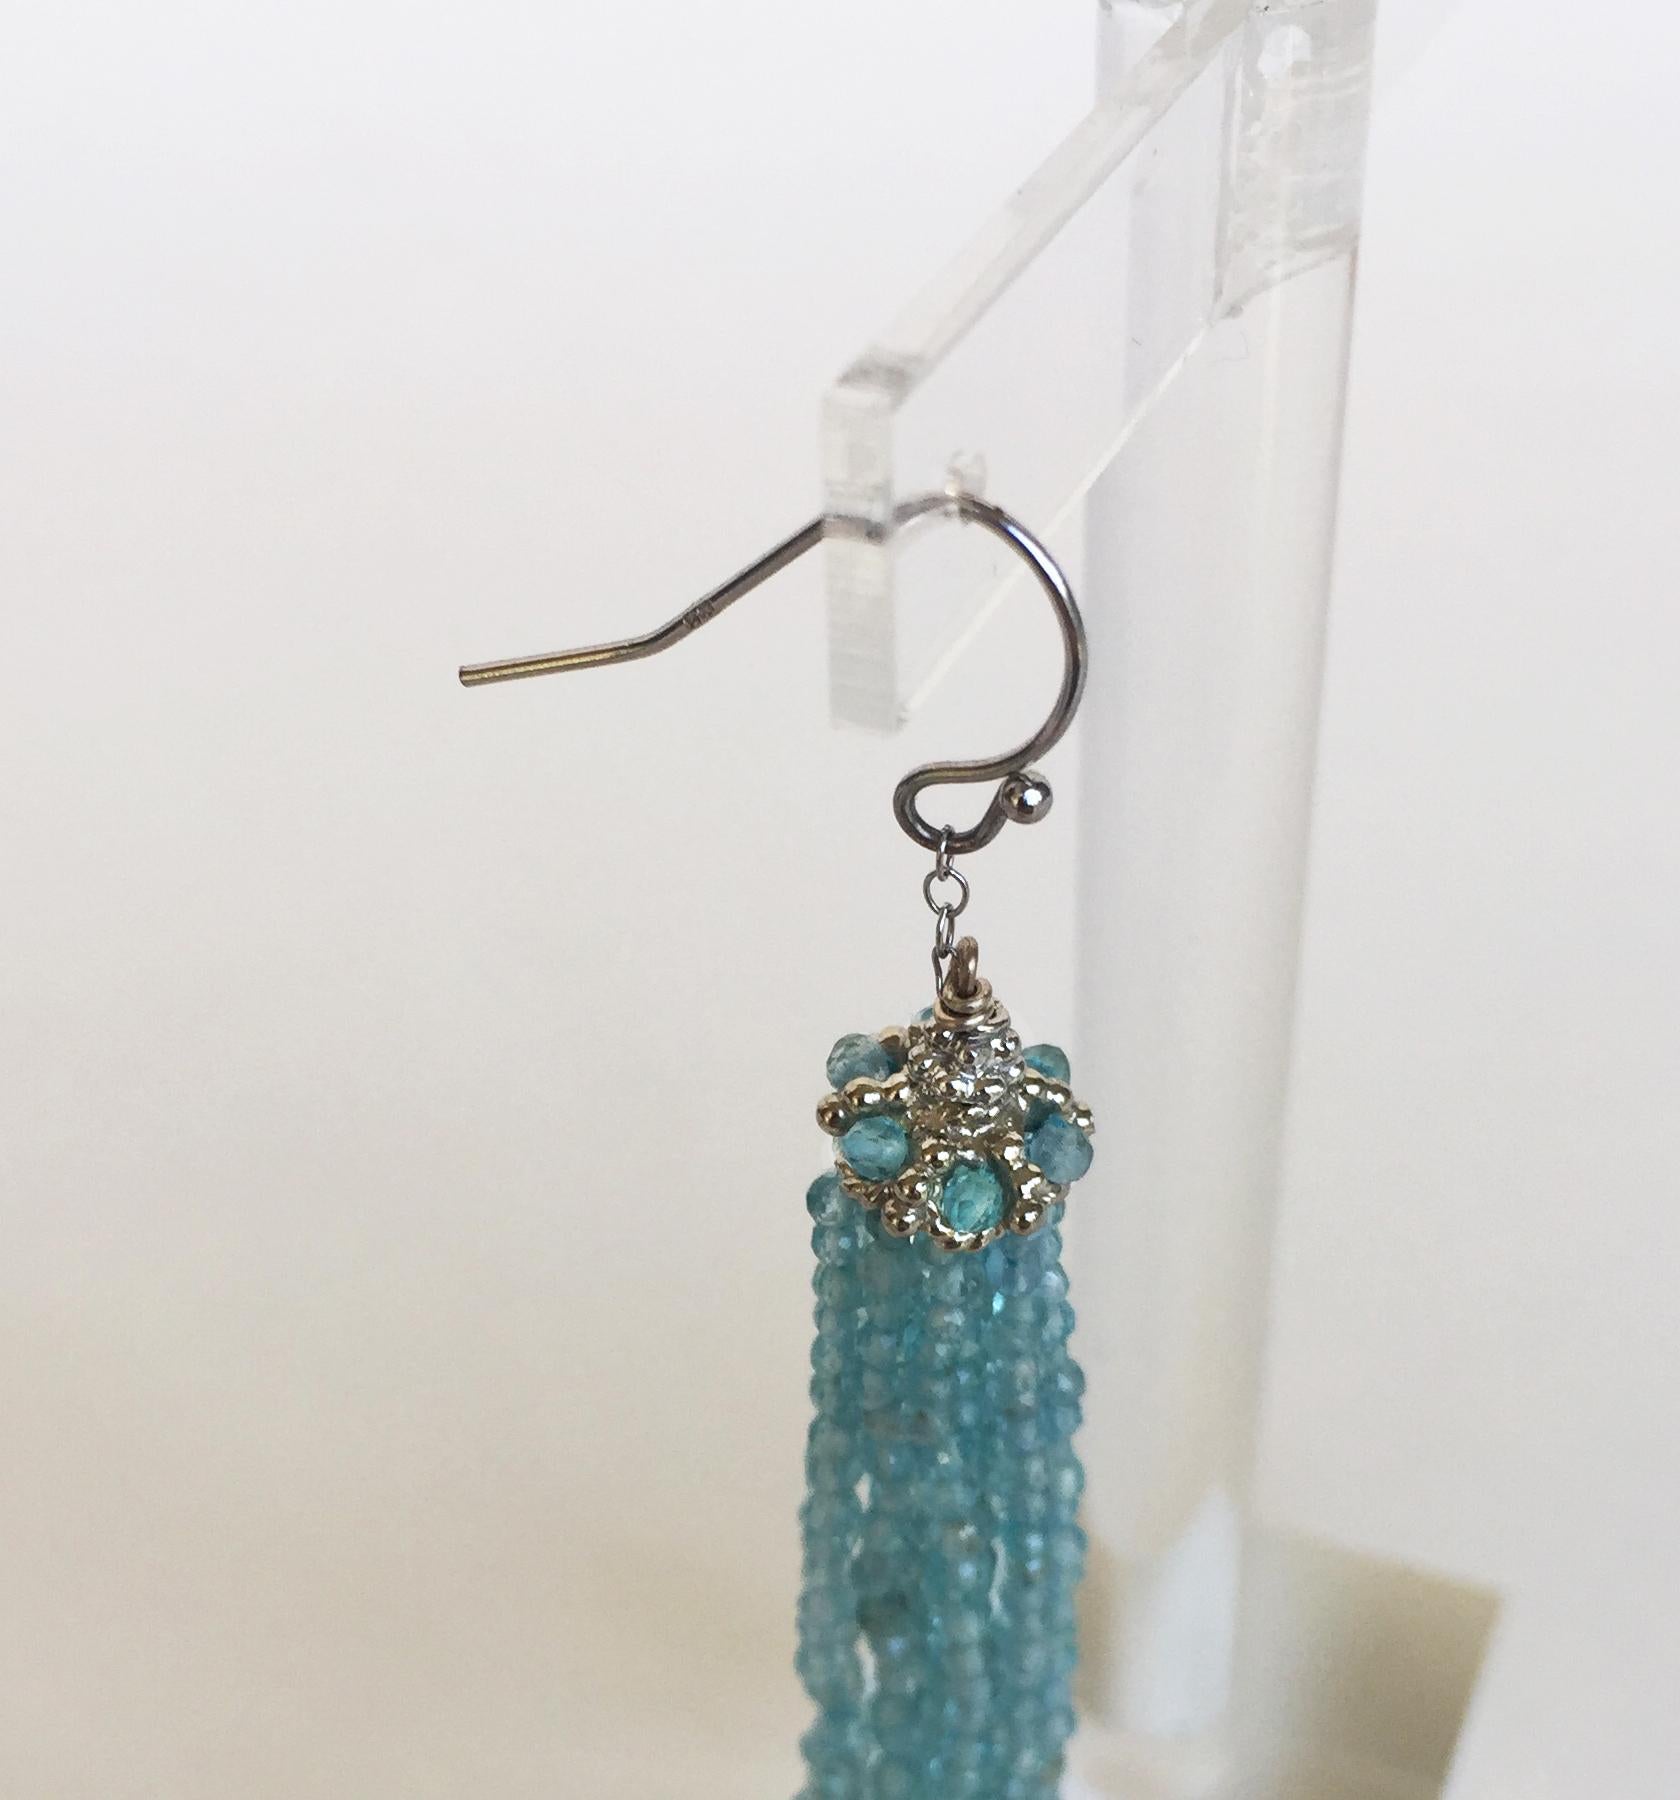 Artist Marina J Faceted Aquamarine Tassel Earrings with 14 K White Gold Chain and Hook